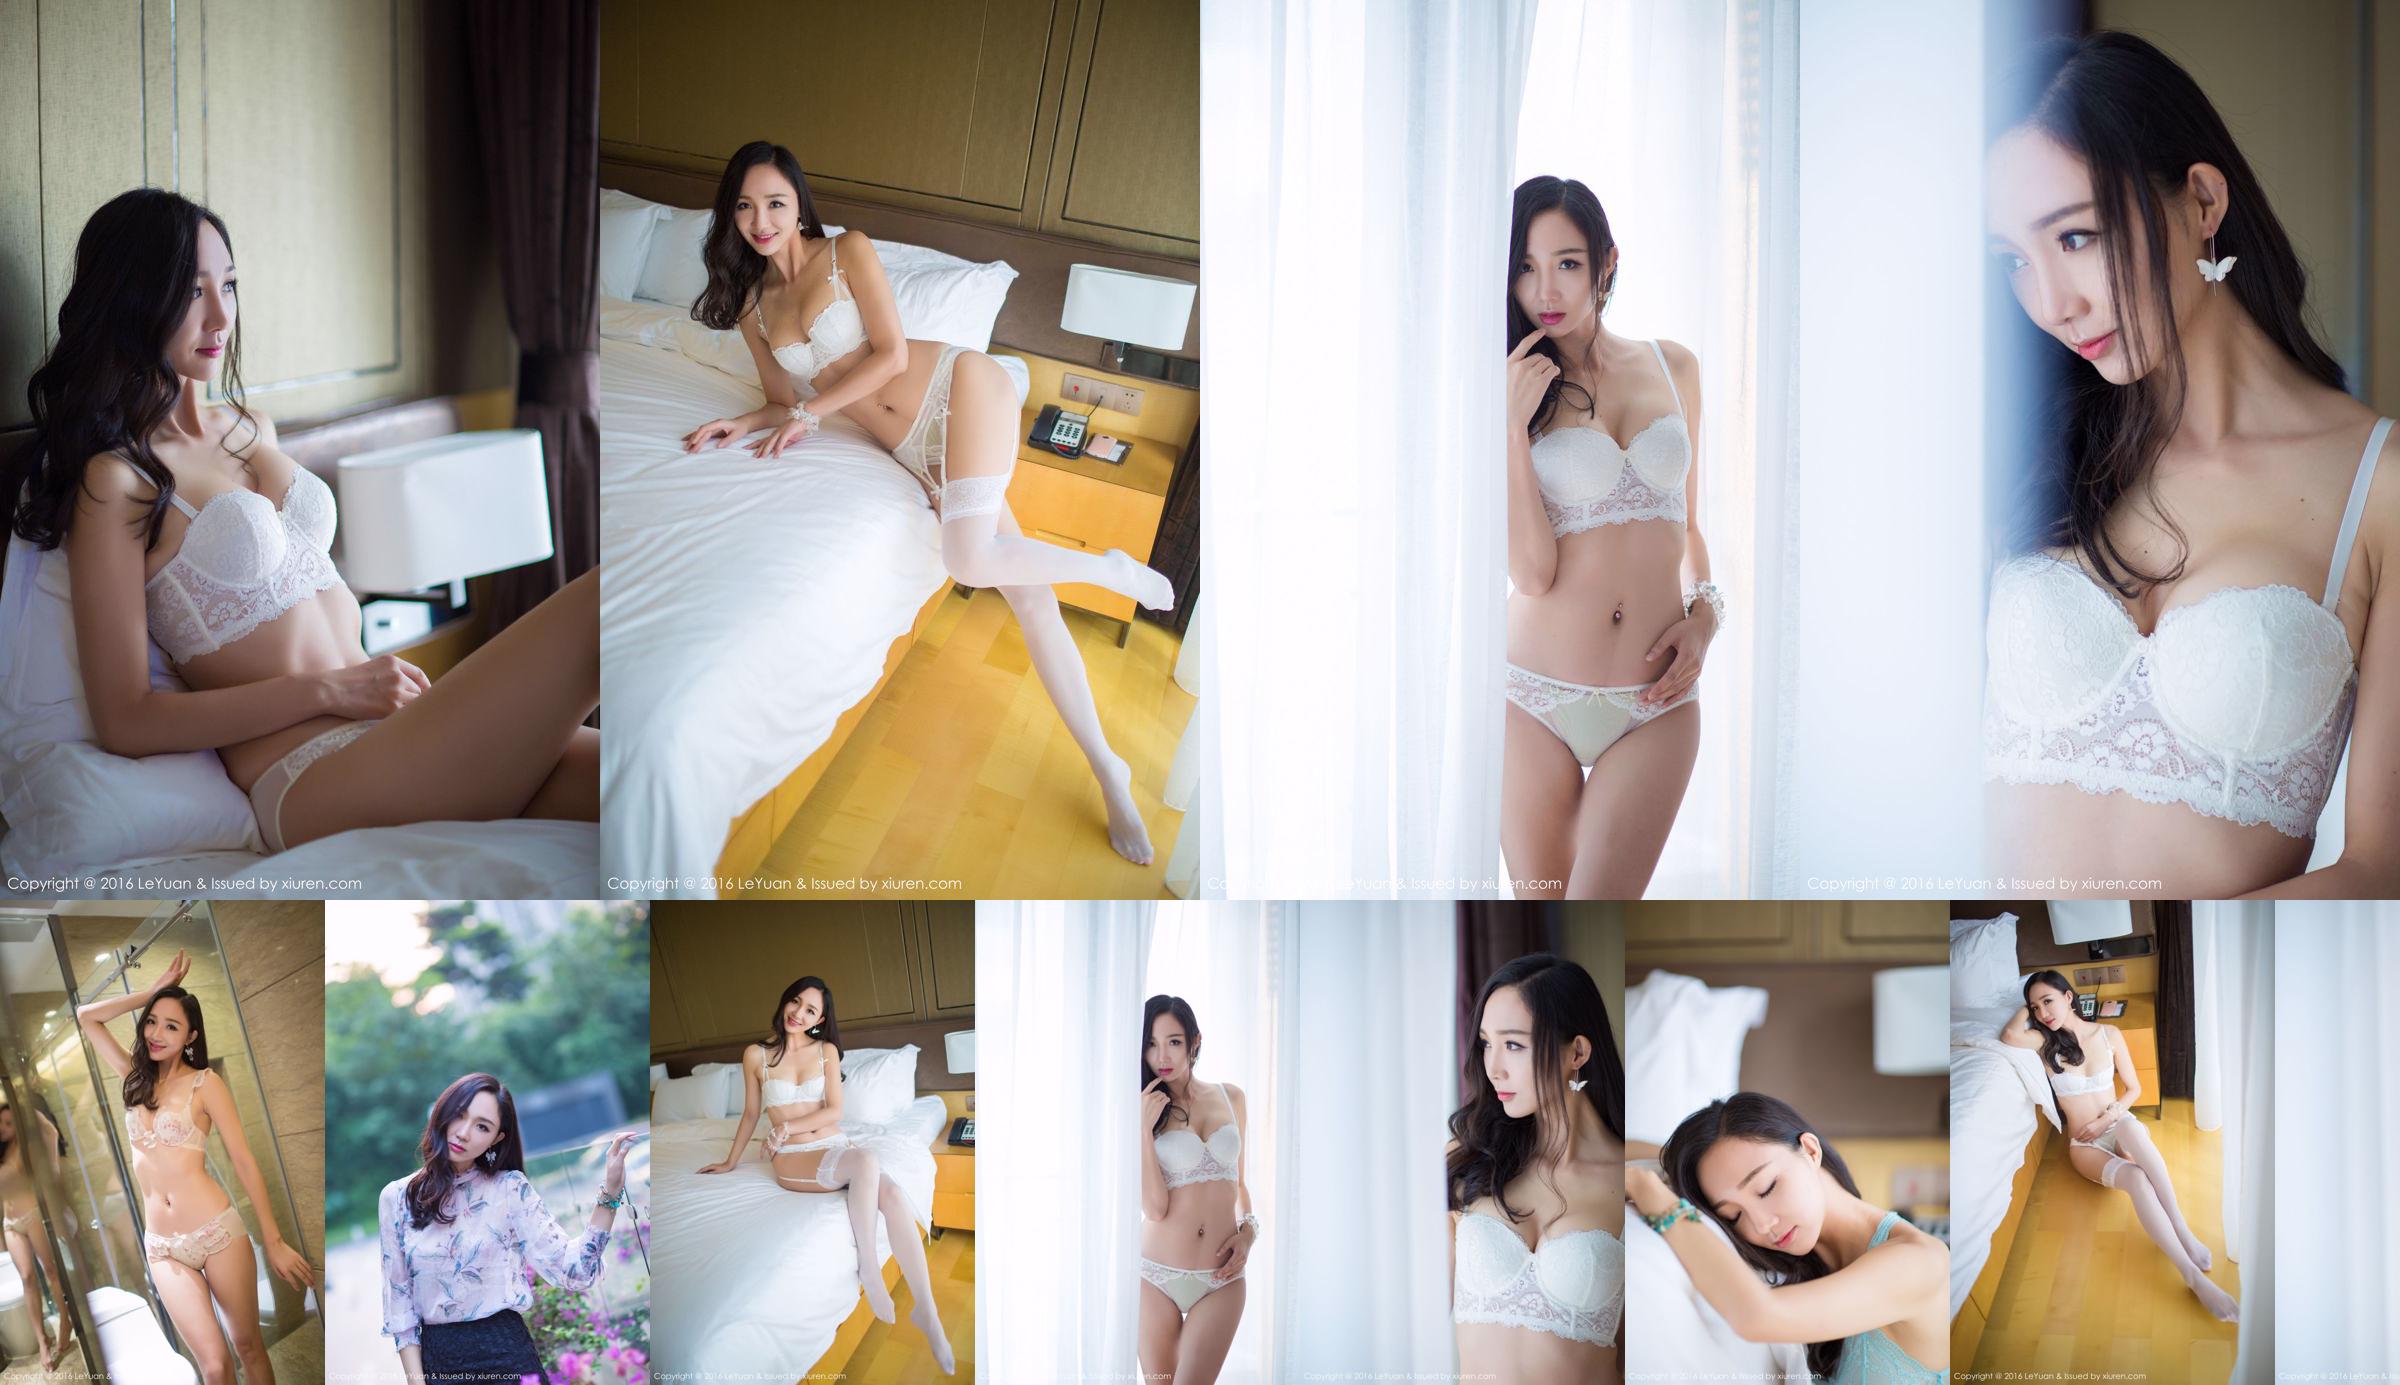 Beibei maggie "Longues belles jambes, grande figure gracieuse" [Star Paradise LeYuan] Vol.009 No.083ad3 Page 1